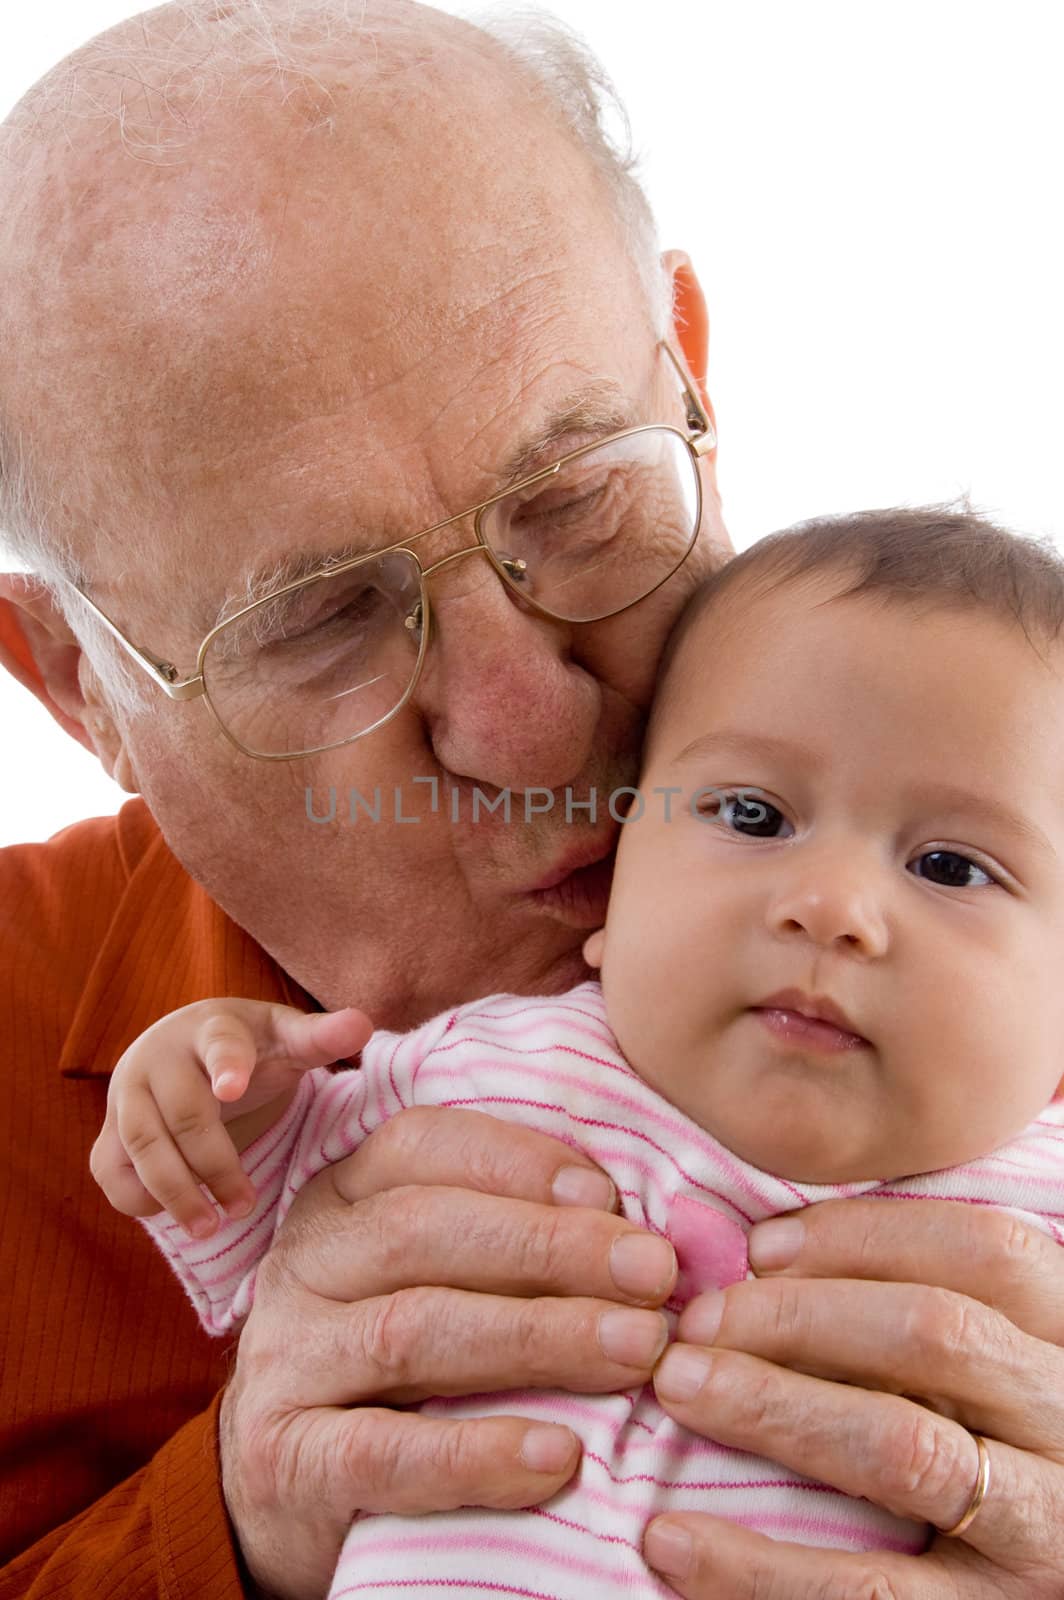 old man kissing the cute baby by imagerymajestic